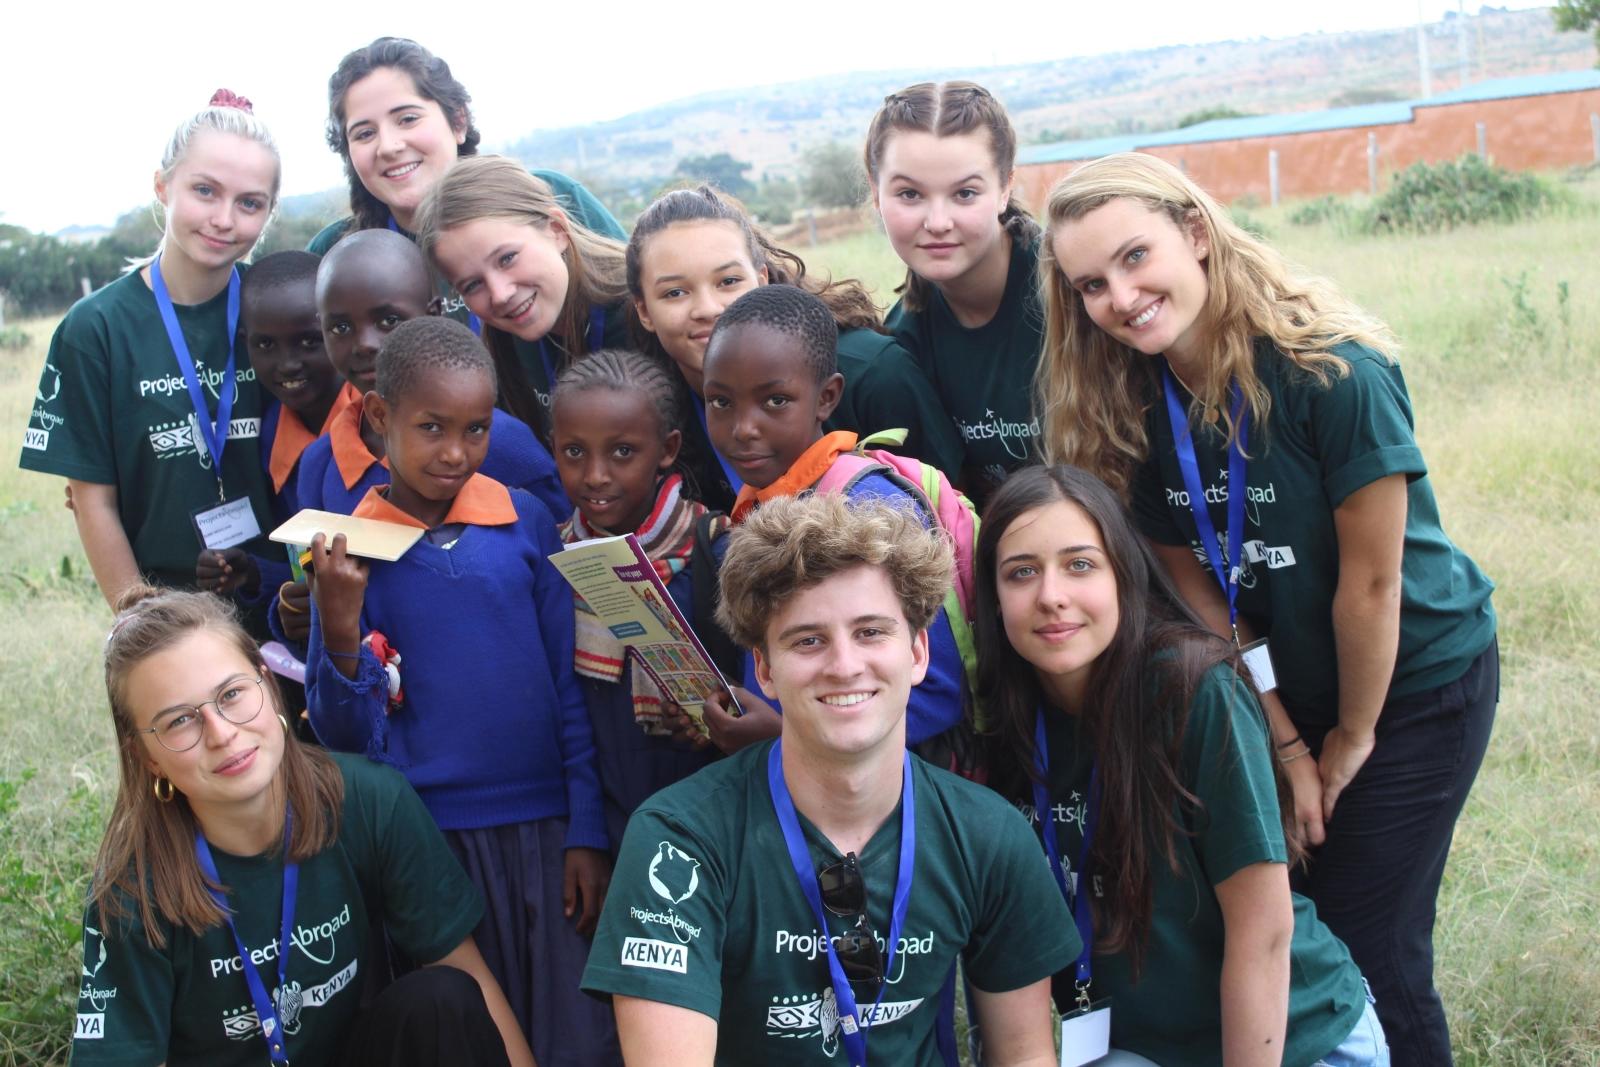 High School Special volunteers pose for a photo after a medical outreach at a school in Kenya